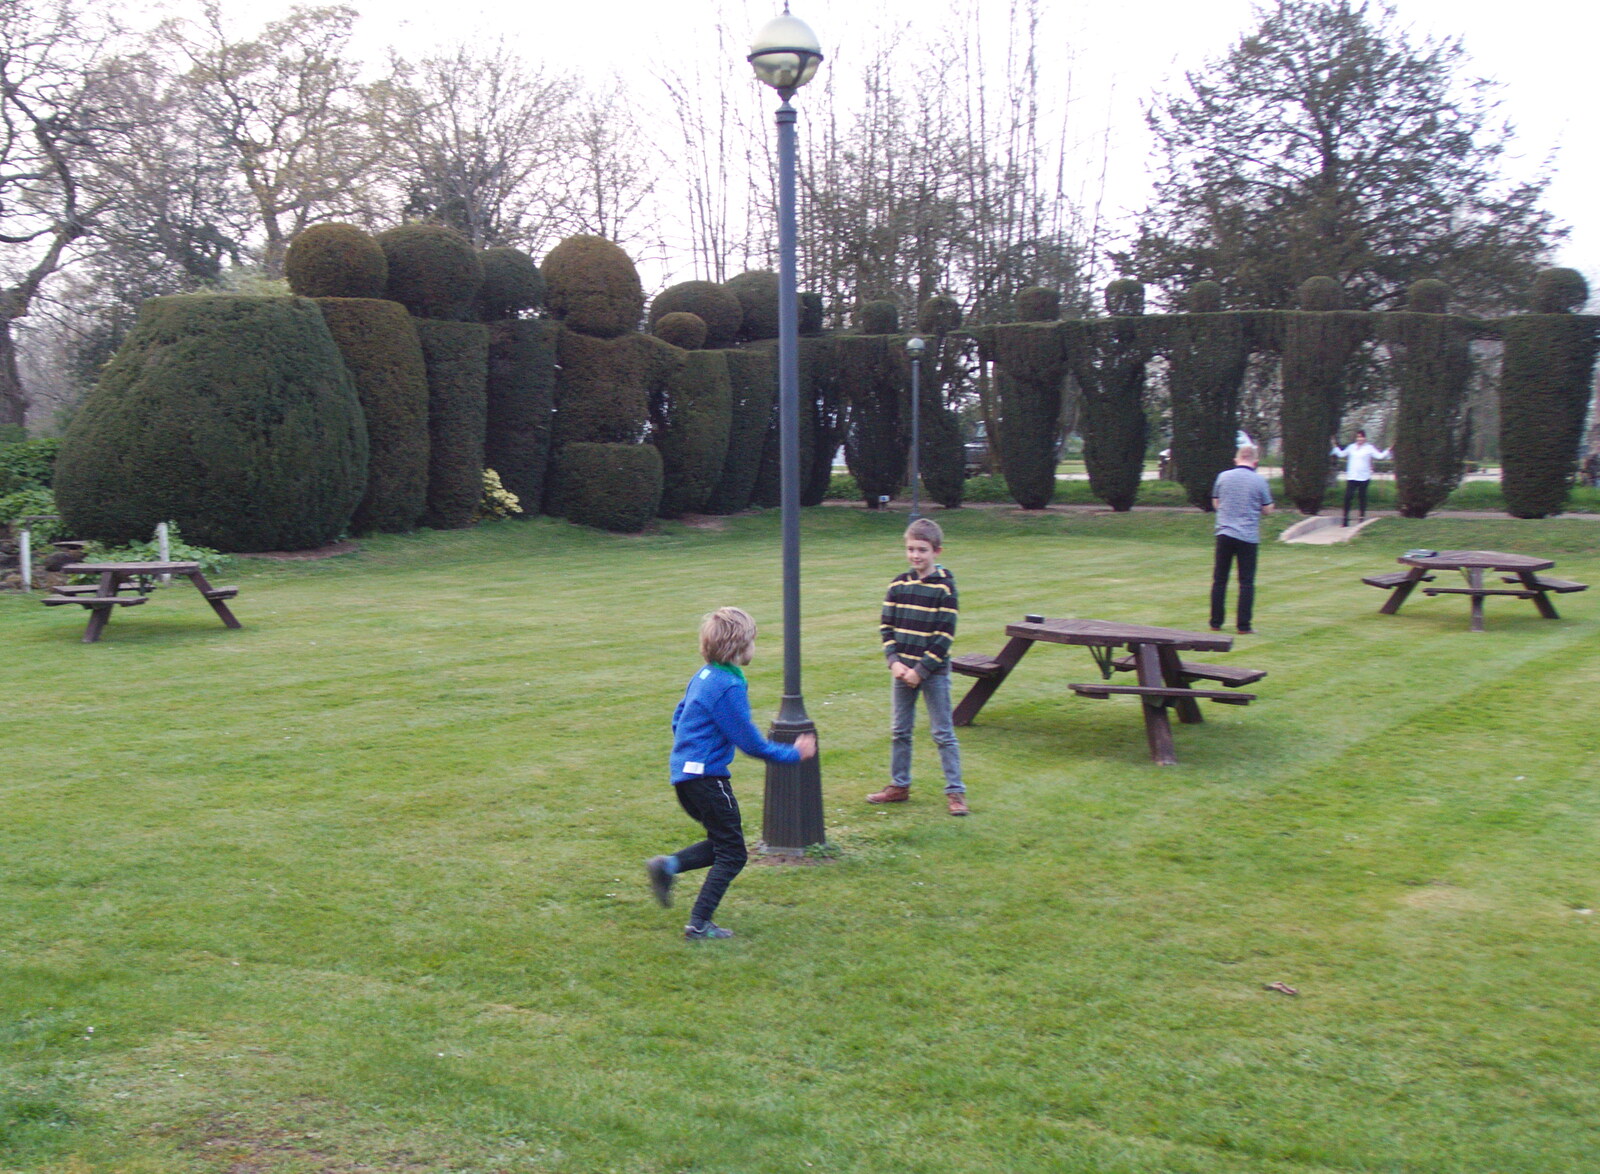 Running around amongst the topiary from Lunch in the Oaksmere, Brome, Suffolk - 14th April 2019